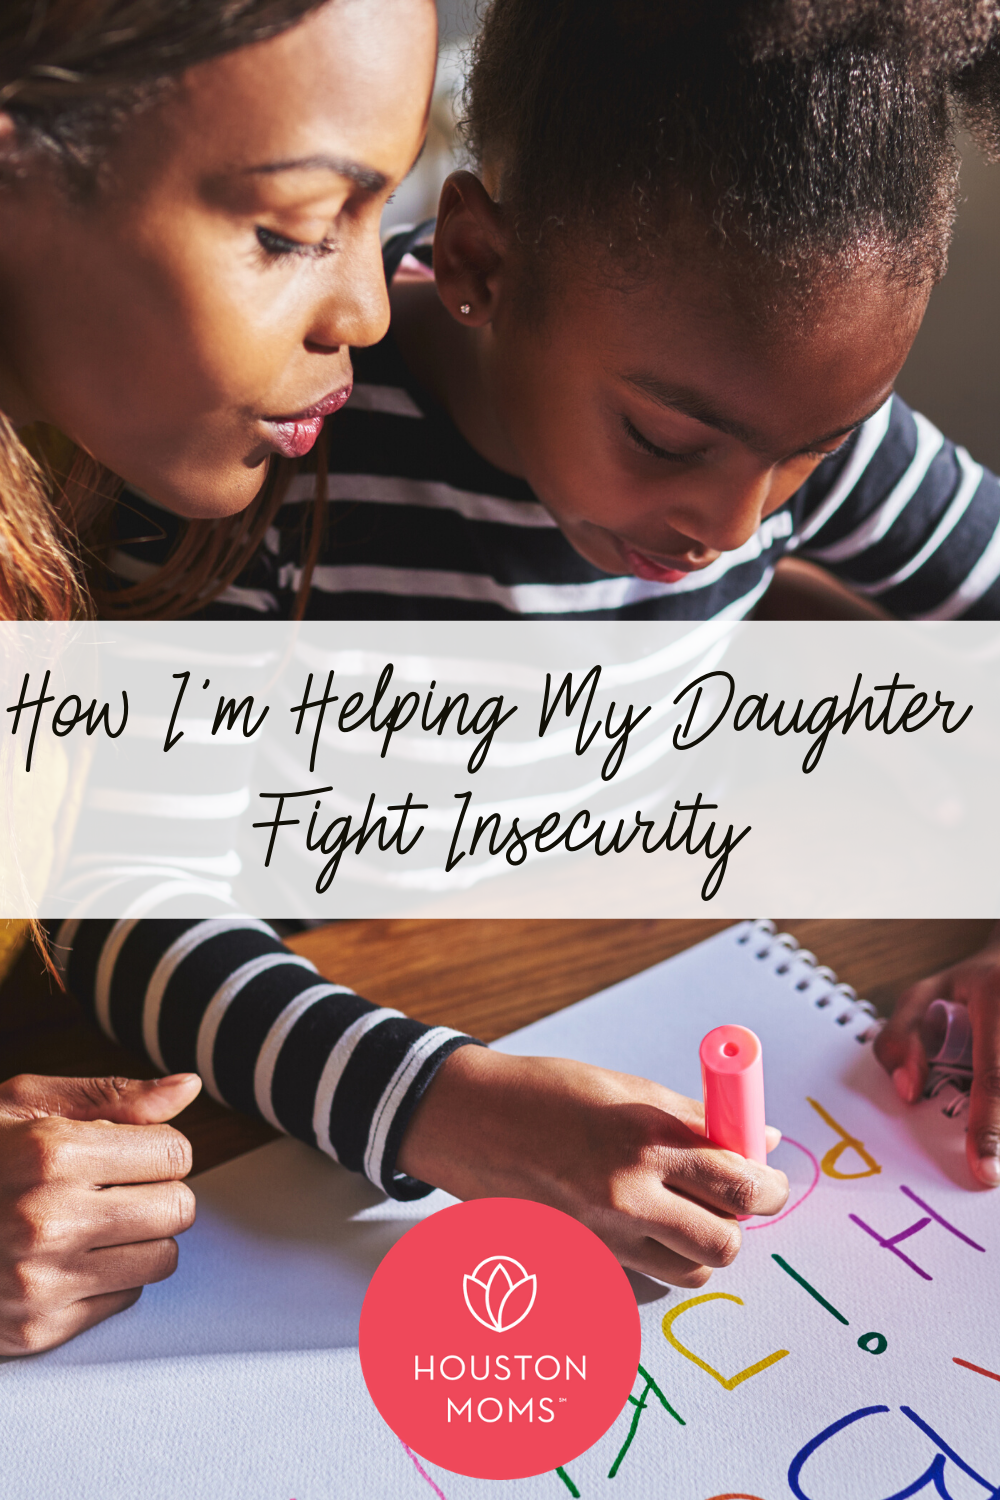 Houston Moms "How I'm Helping My Daughter Fight Insecurity" #houstonmoms #houstonmomsblog #momsaroundhouston